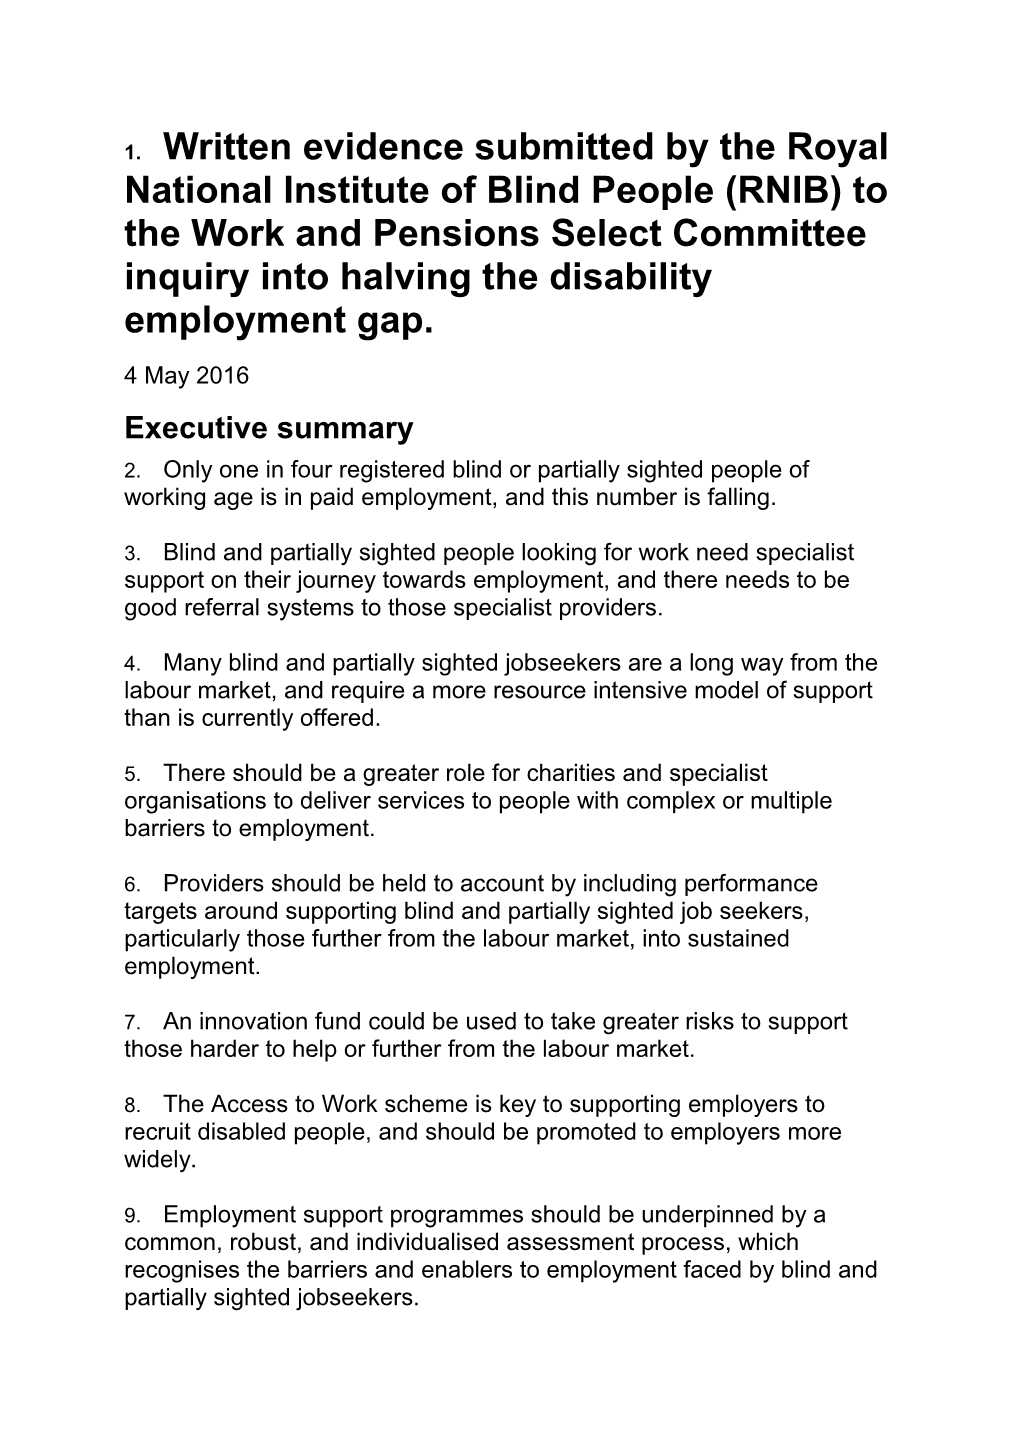 Written Evidence Submitted by the Royal National Institute of Blind People (RNIB) to The